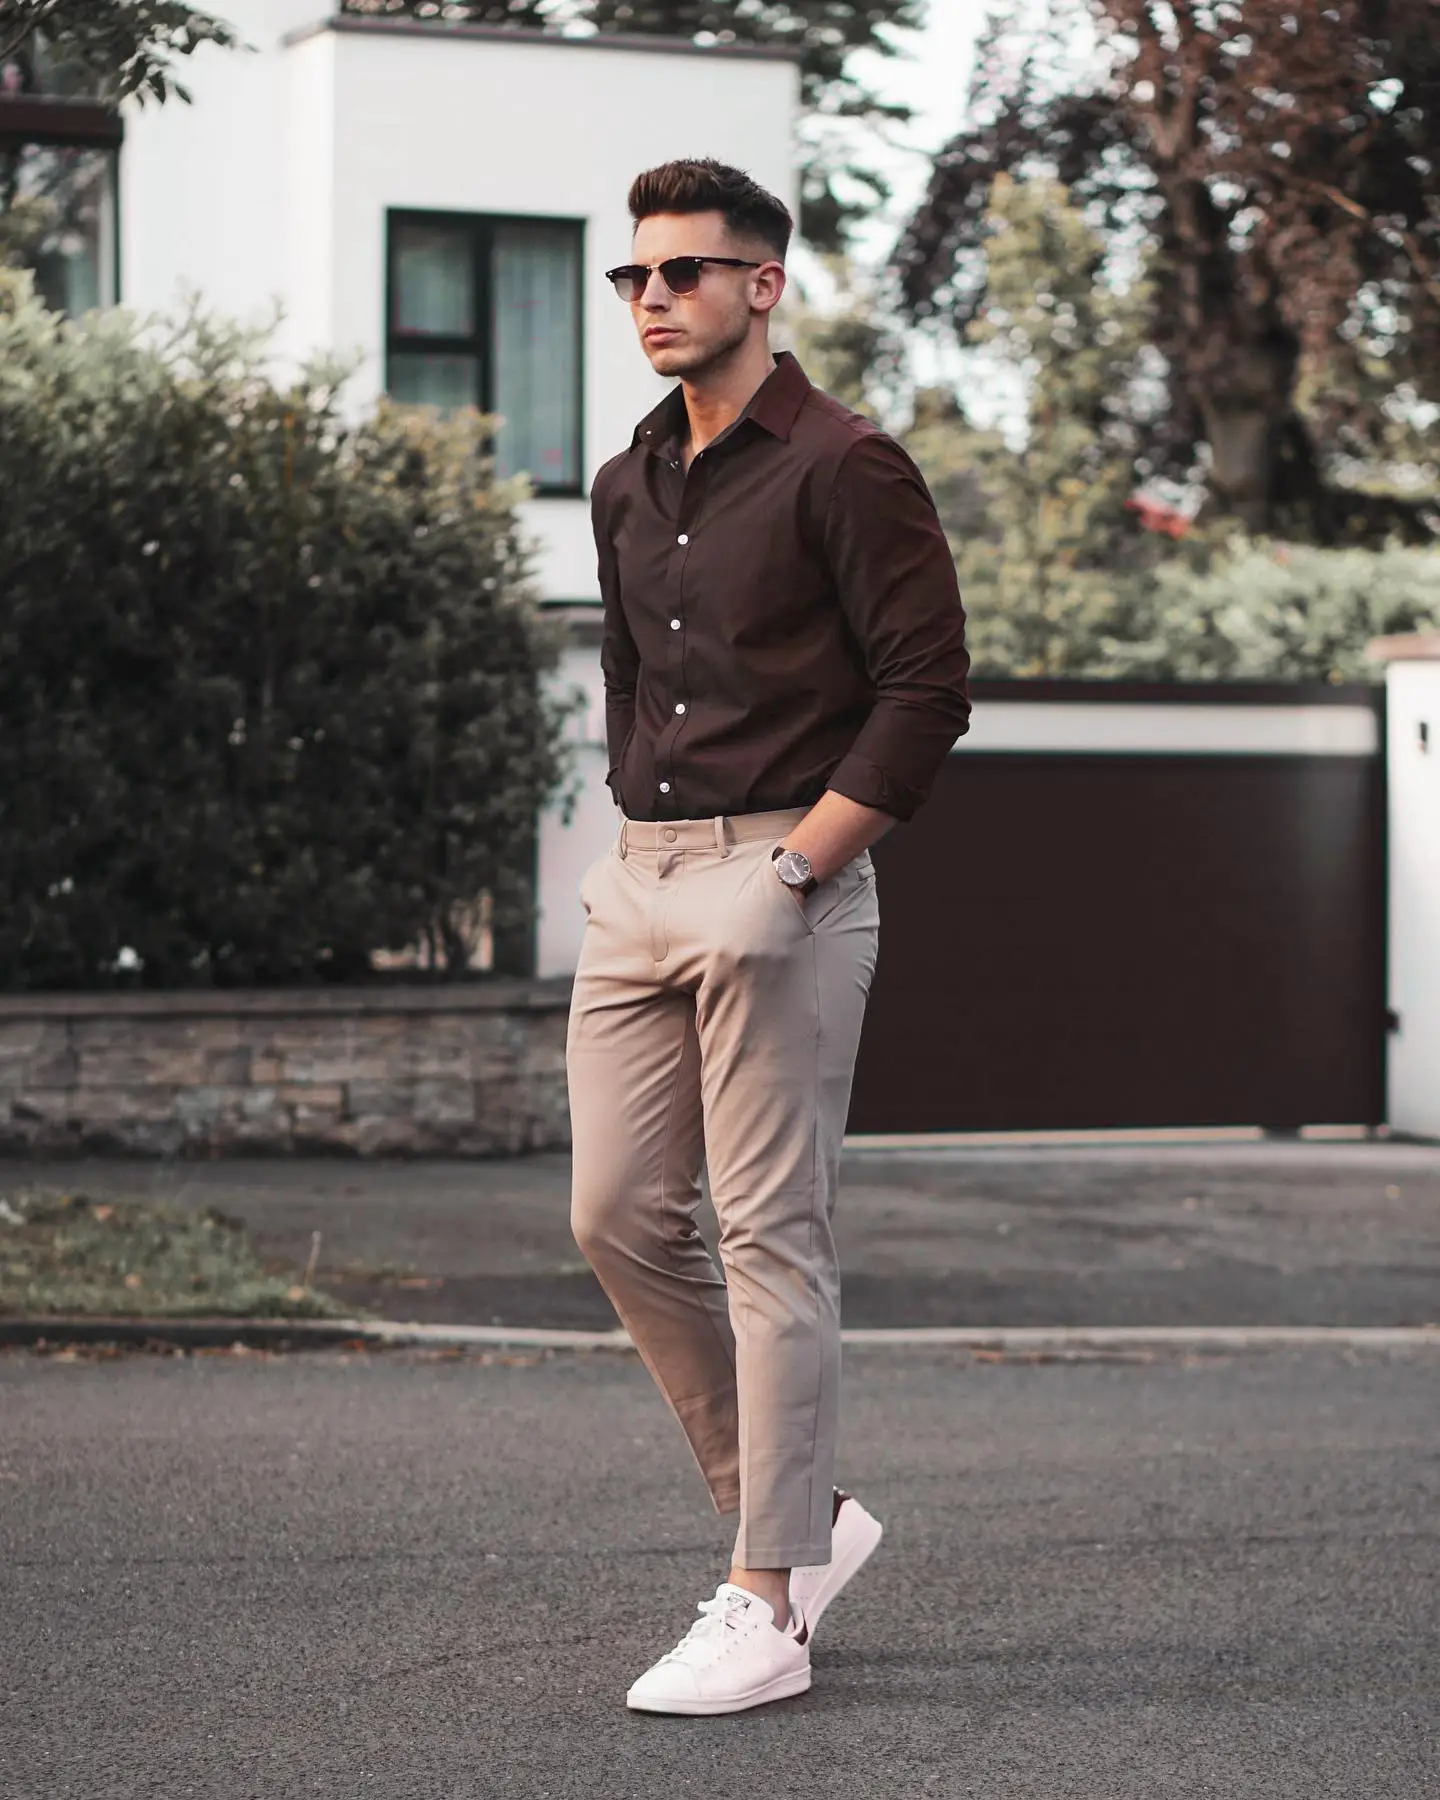 10 Awesome Khaki or Camel Color Shirt Matching Pants Ideas  TiptopGents